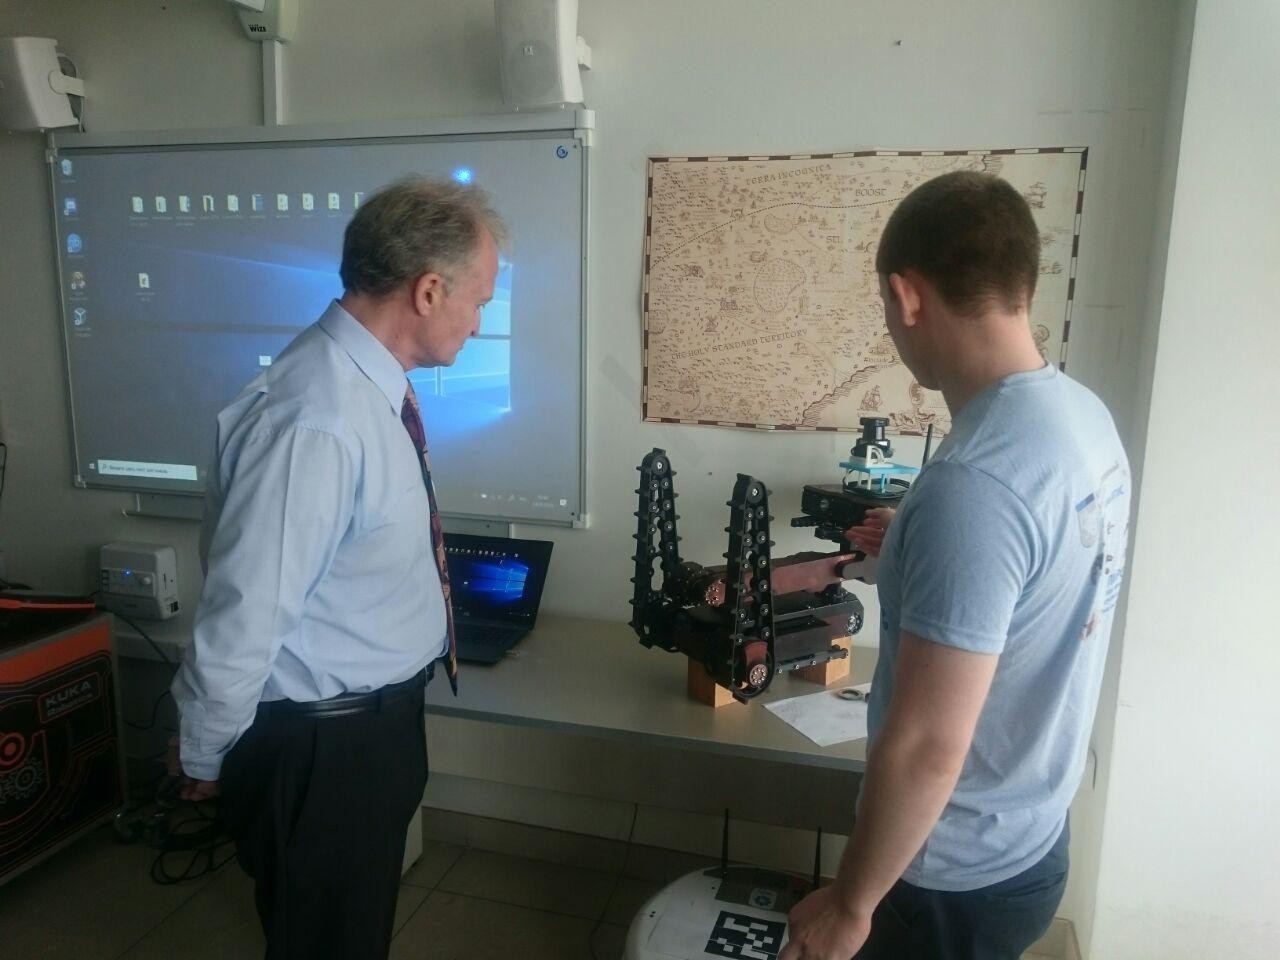 Professor from Germany visited the Laboratory of Intelligent Robotic Systems.